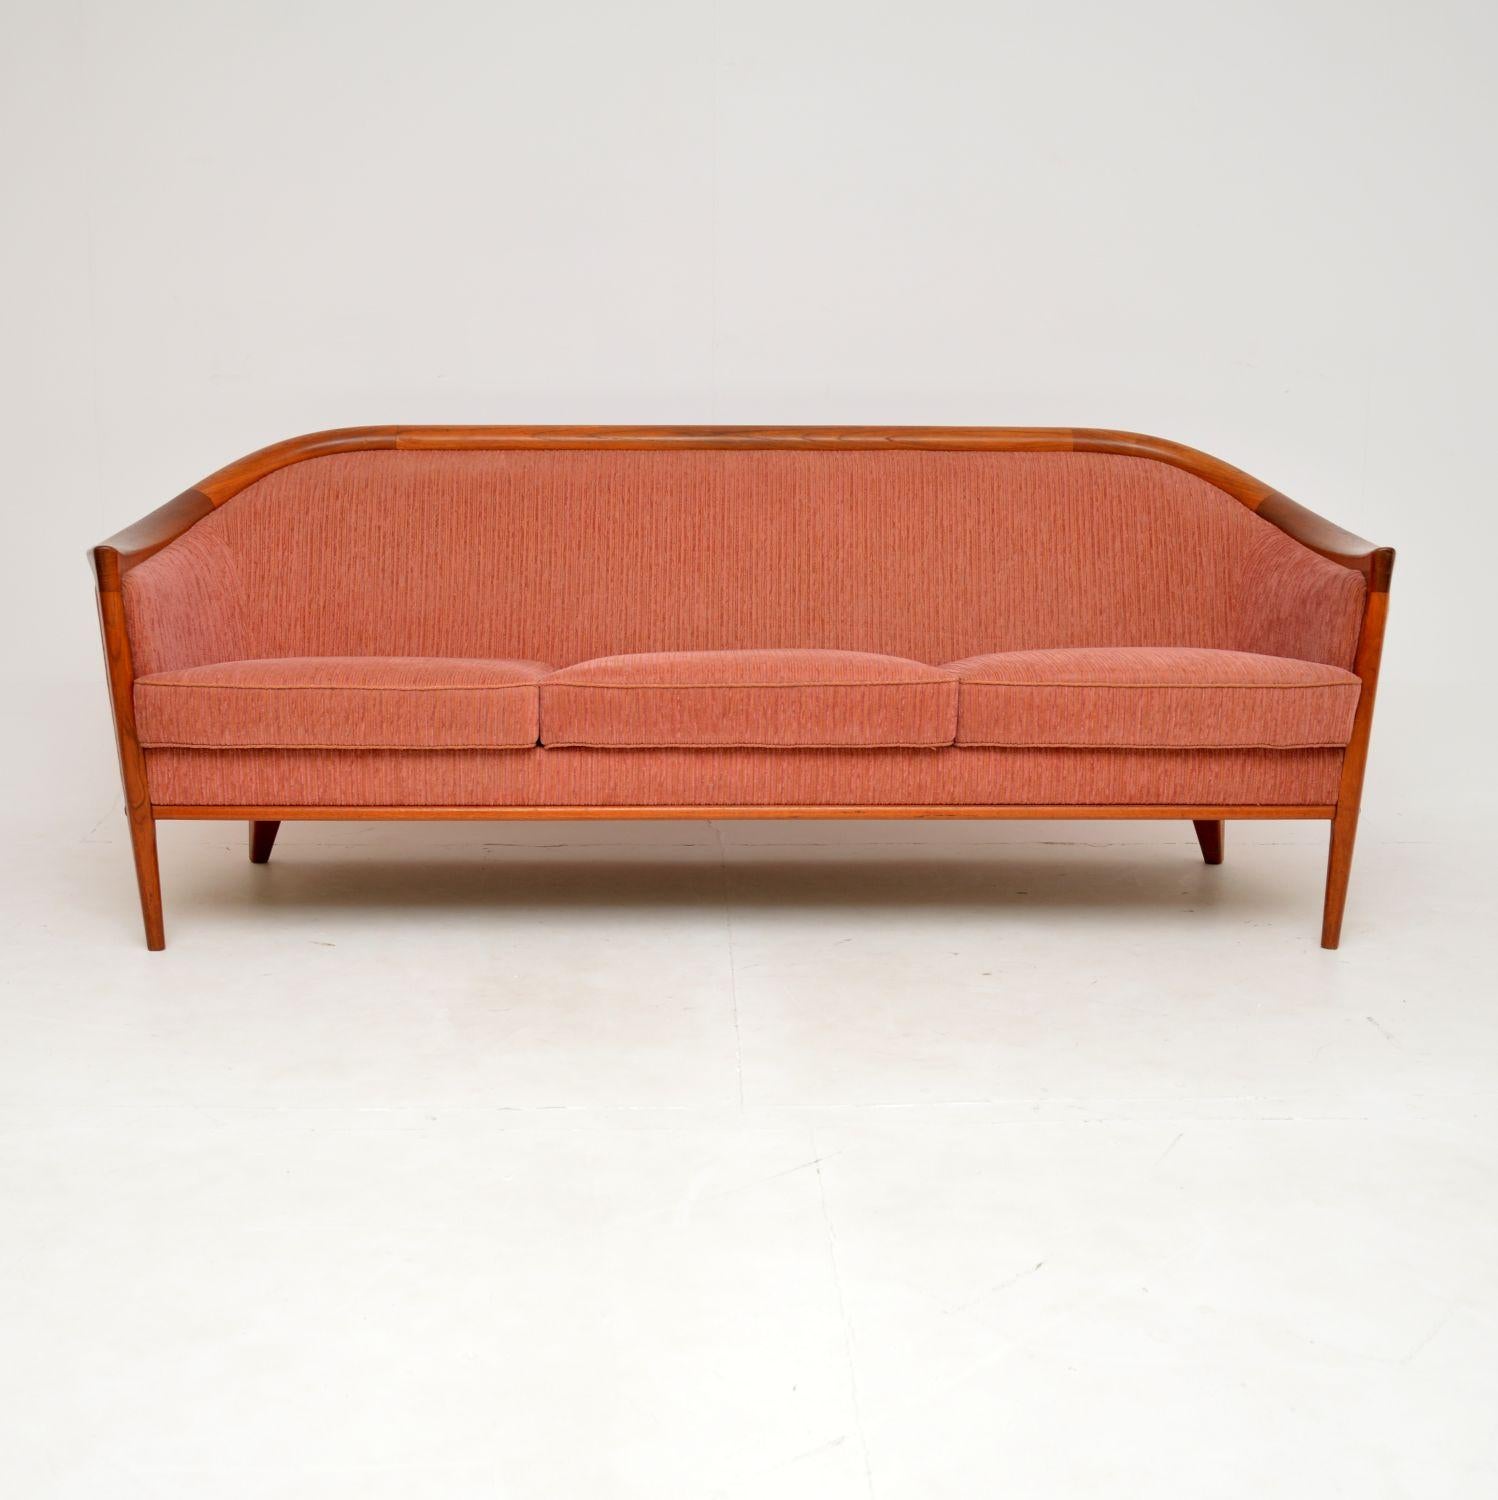 A beautifully designed and extremely well made vintage Swedish sofa in teak. This was designed by Bertil Fridhagen, it was made in Sweden by Broderna Andersson in the 1960’s.

The solid teak frame is of exceptional quality, it is very sturdy and